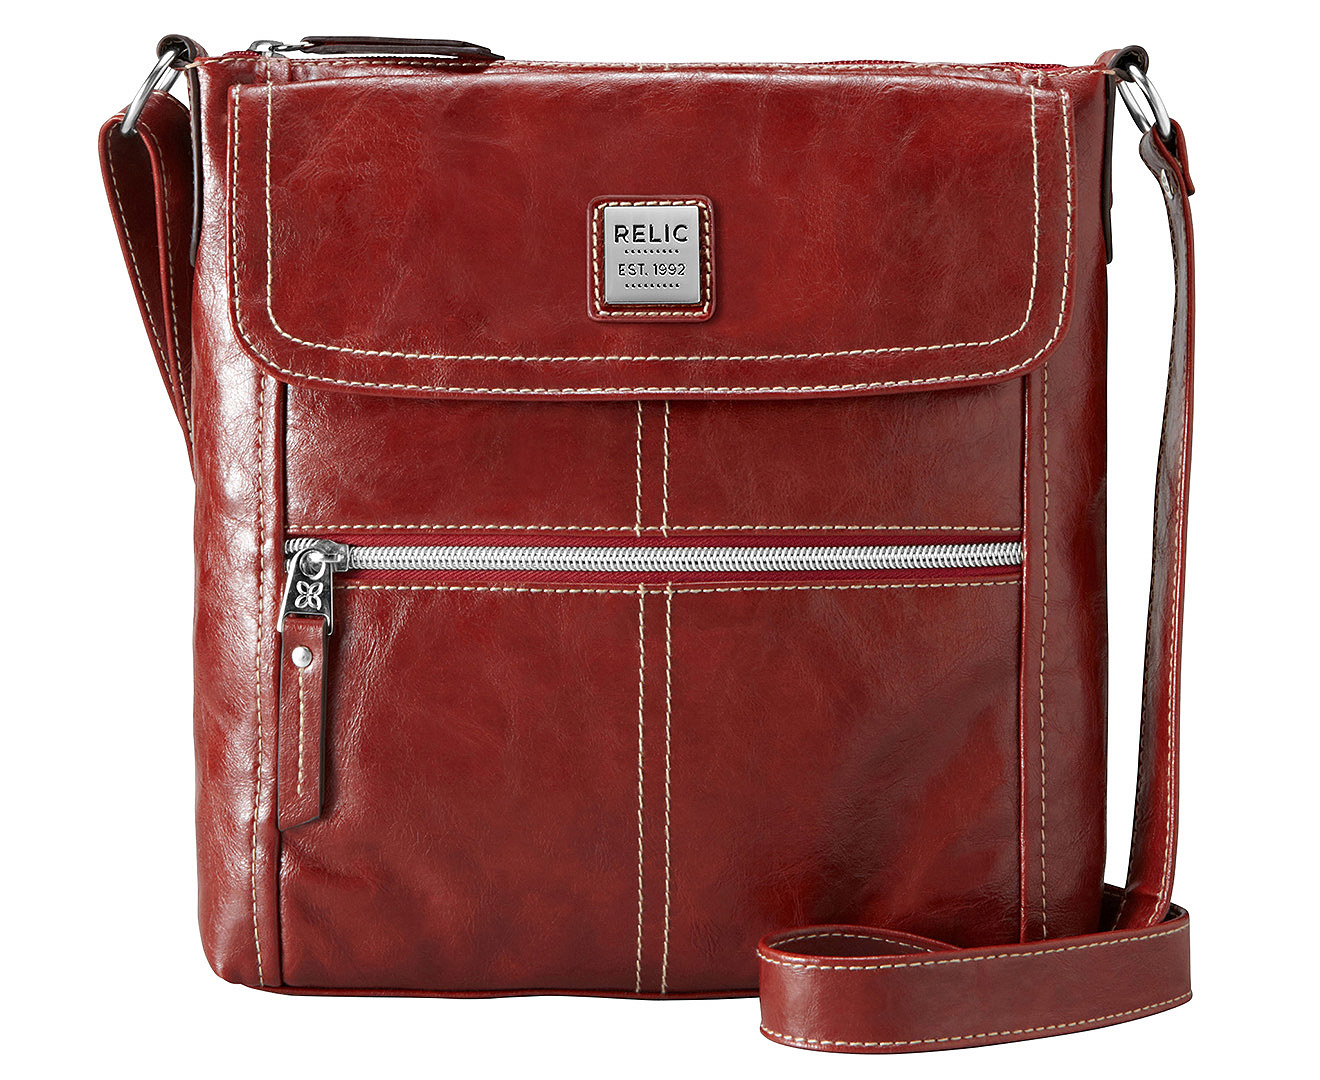 Relic Erica Flap Crossbody Bag - Real Red | Scoopon Shopping